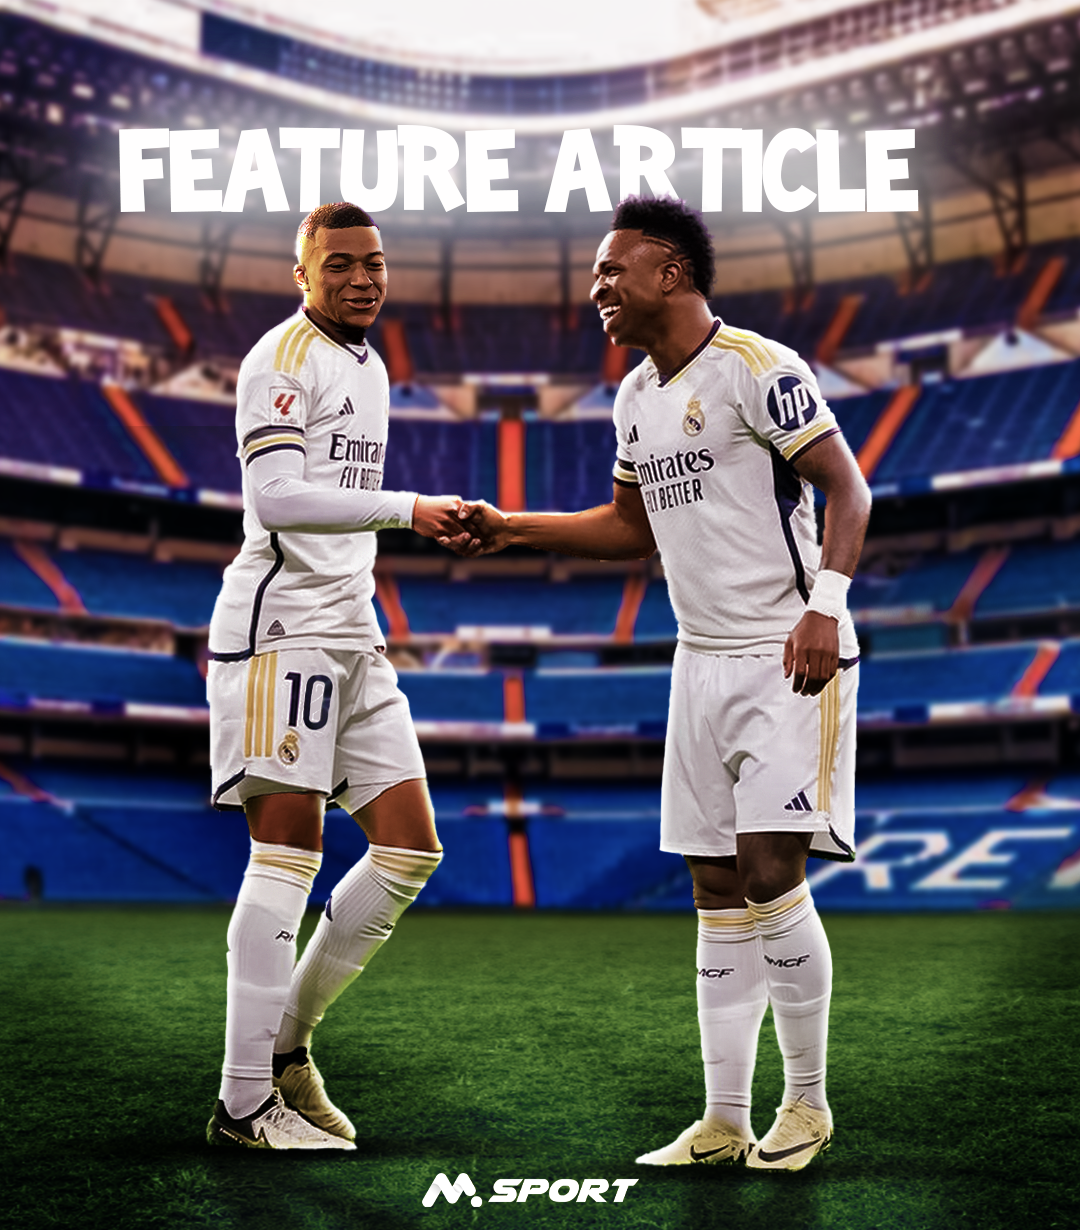 Mbappe Coming to Real Madrid, Should not Mean Vini Jr Leaves: They Will be Unstoppable Together